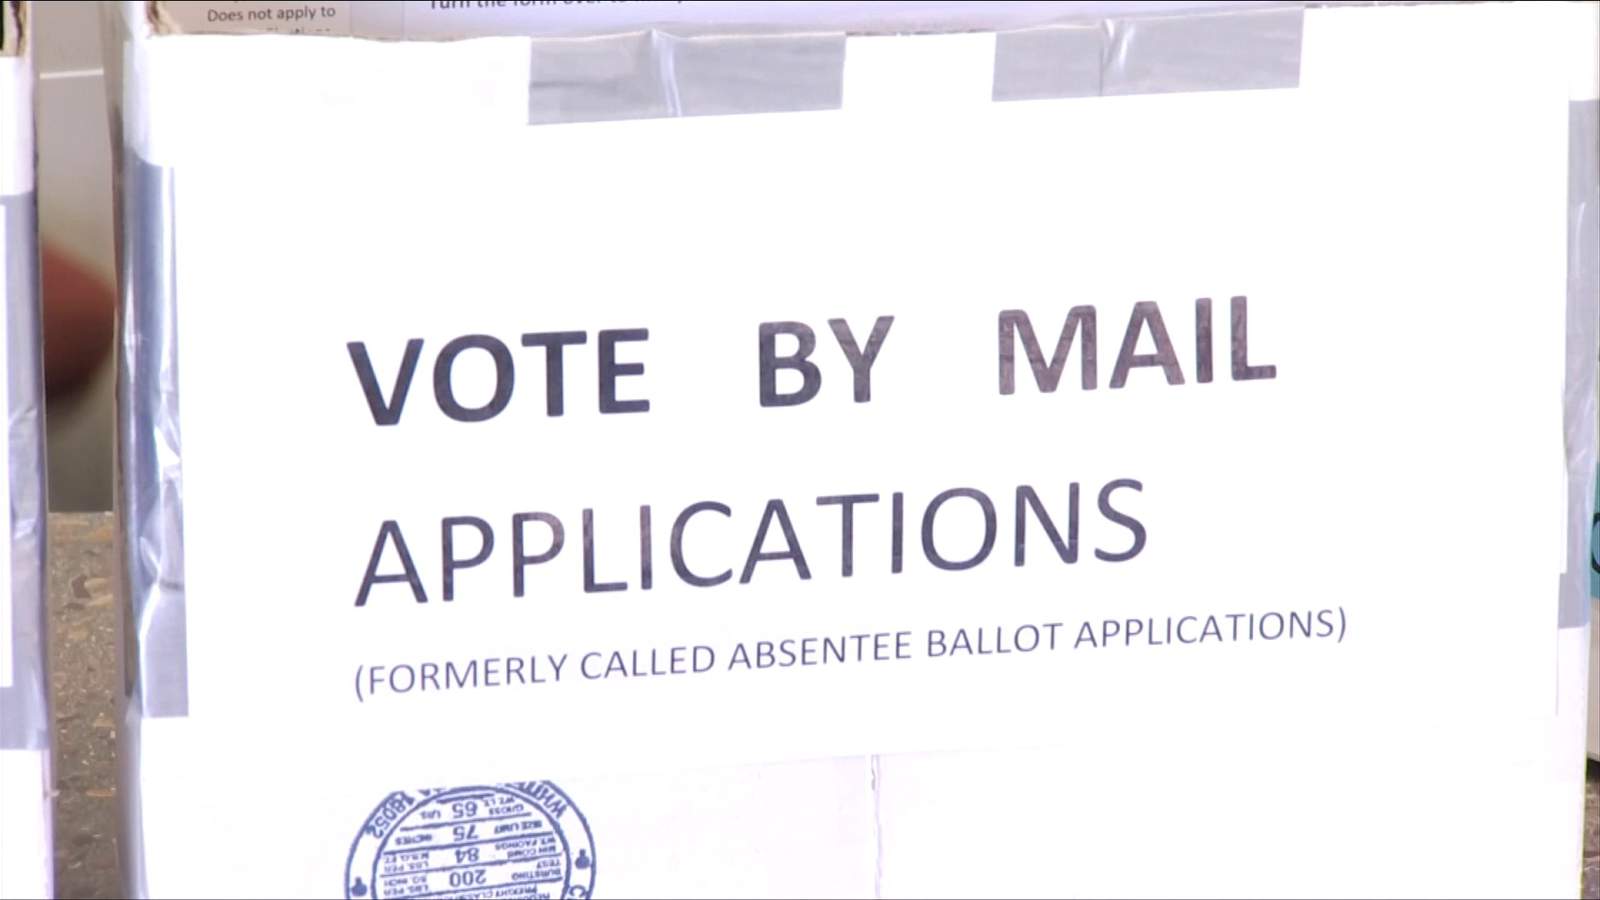 Roanoke election directors explain confusing aspects of mail-in voting: ‘Make sure that your vote is cast'